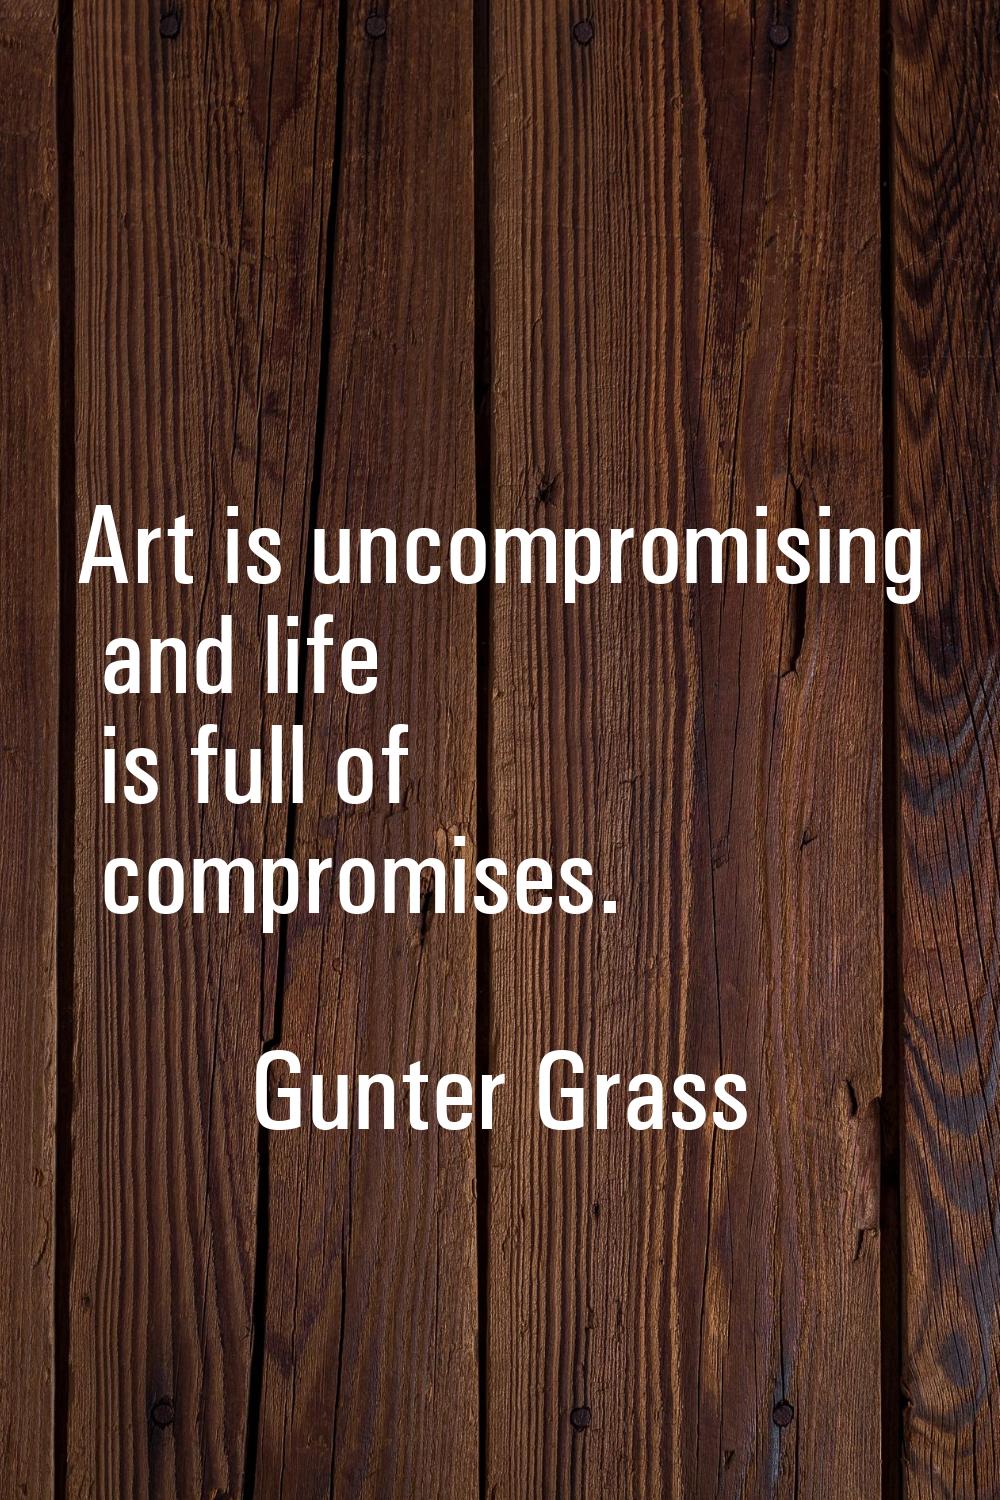 Art is uncompromising and life is full of compromises.